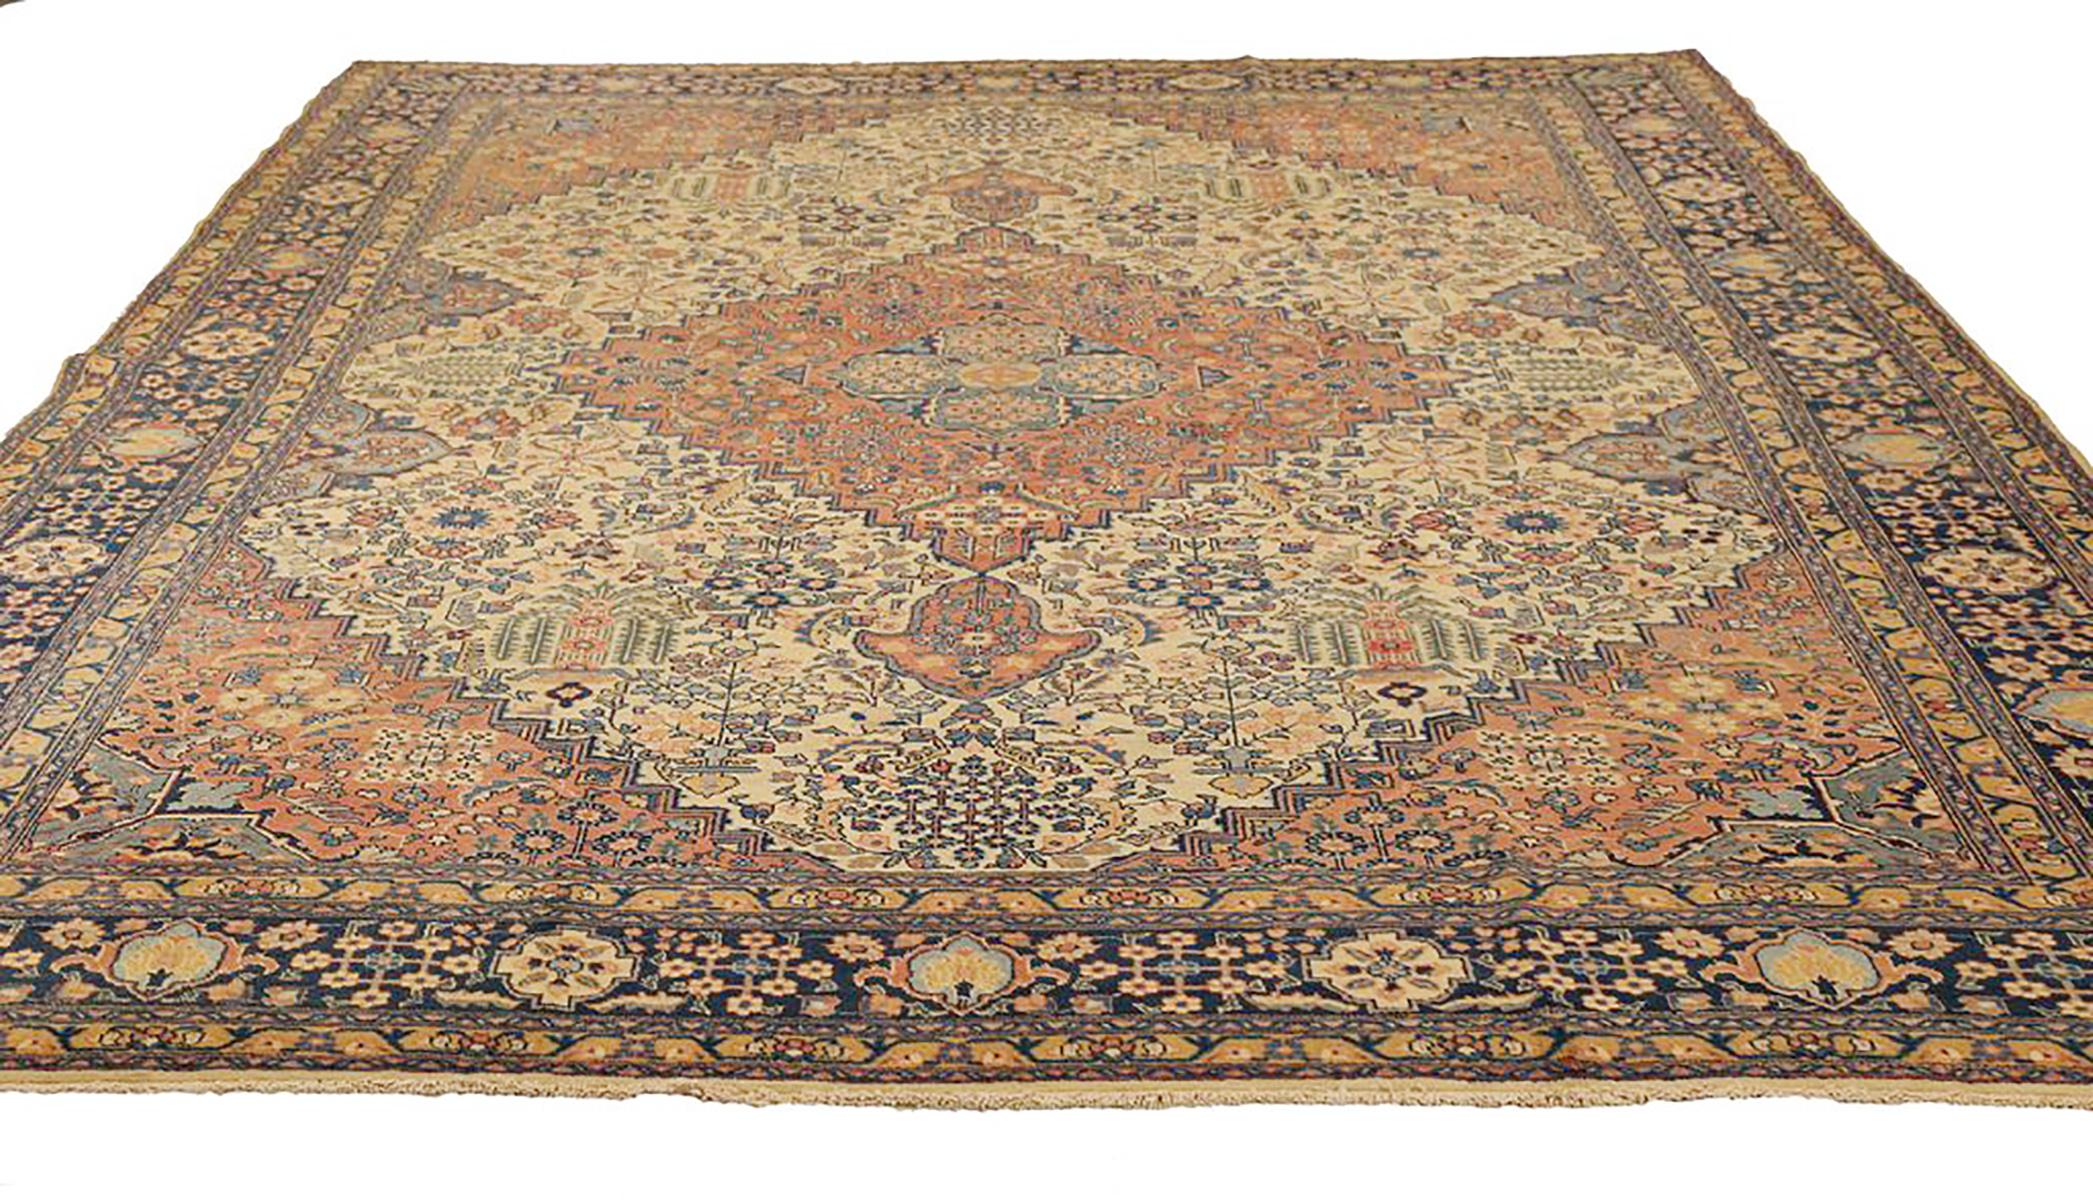 Antique Persian rug handwoven from the finest sheep’s wool and colored with all-natural vegetable dyes that are safe for humans and pets. It’s a traditional Tabriz weaving featuring a lovely ensemble of floral designs in beige and navy. It’s a